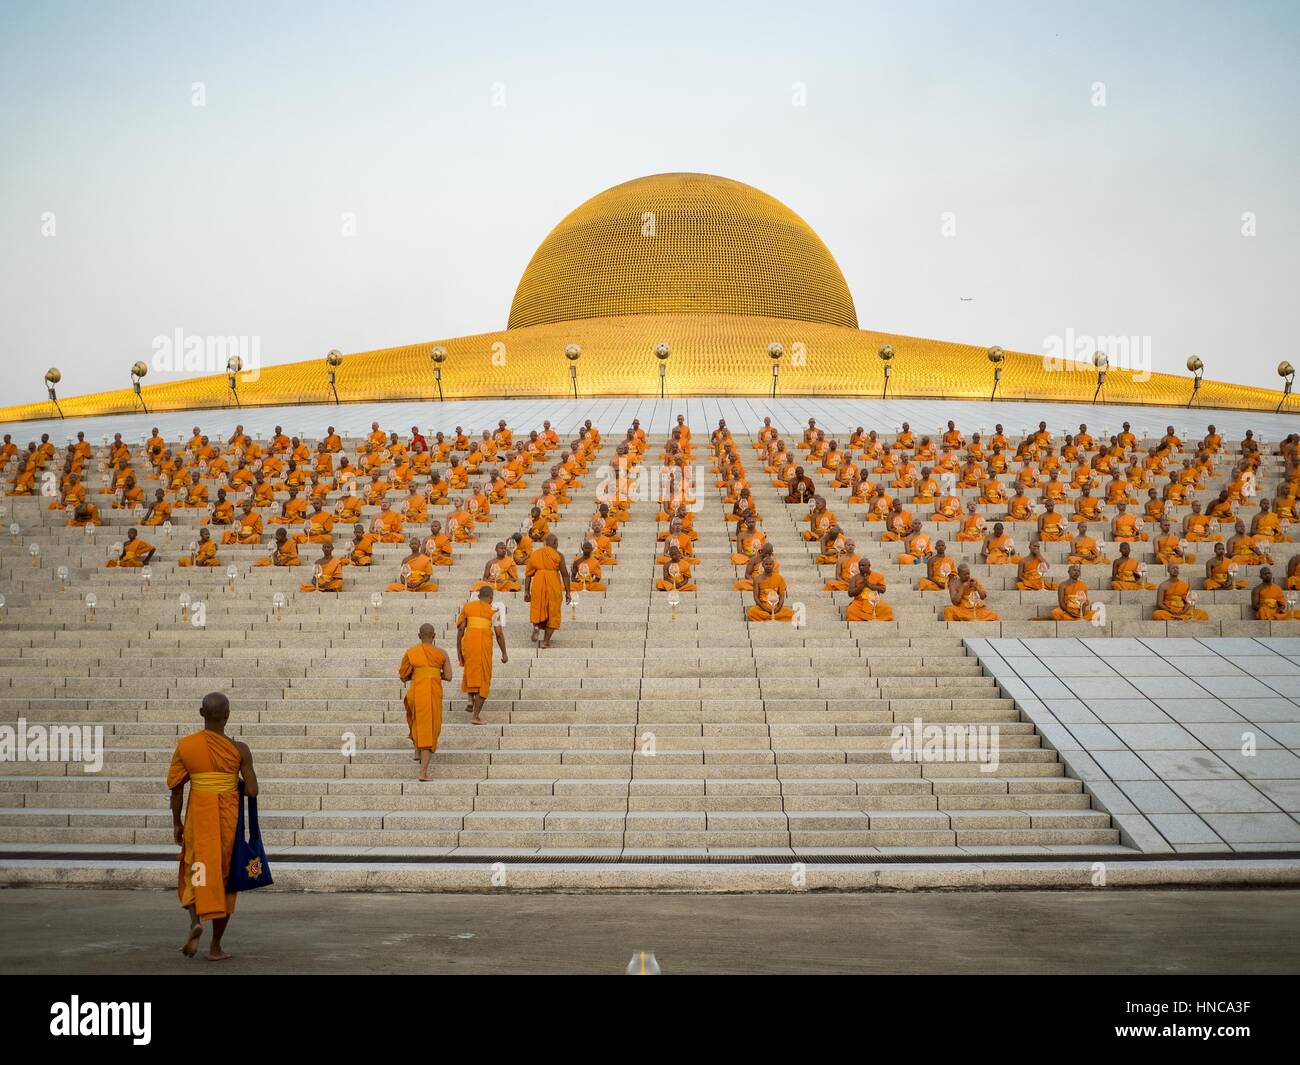 Khlong Luang Pathum Thani Thailand 11th Feb 17 Buddhist Monks Walk To Their Seat During The Makha Bucha Day Service At Wat Phra Dhammakaya Makha Bucha Day Is A Public Holiday In